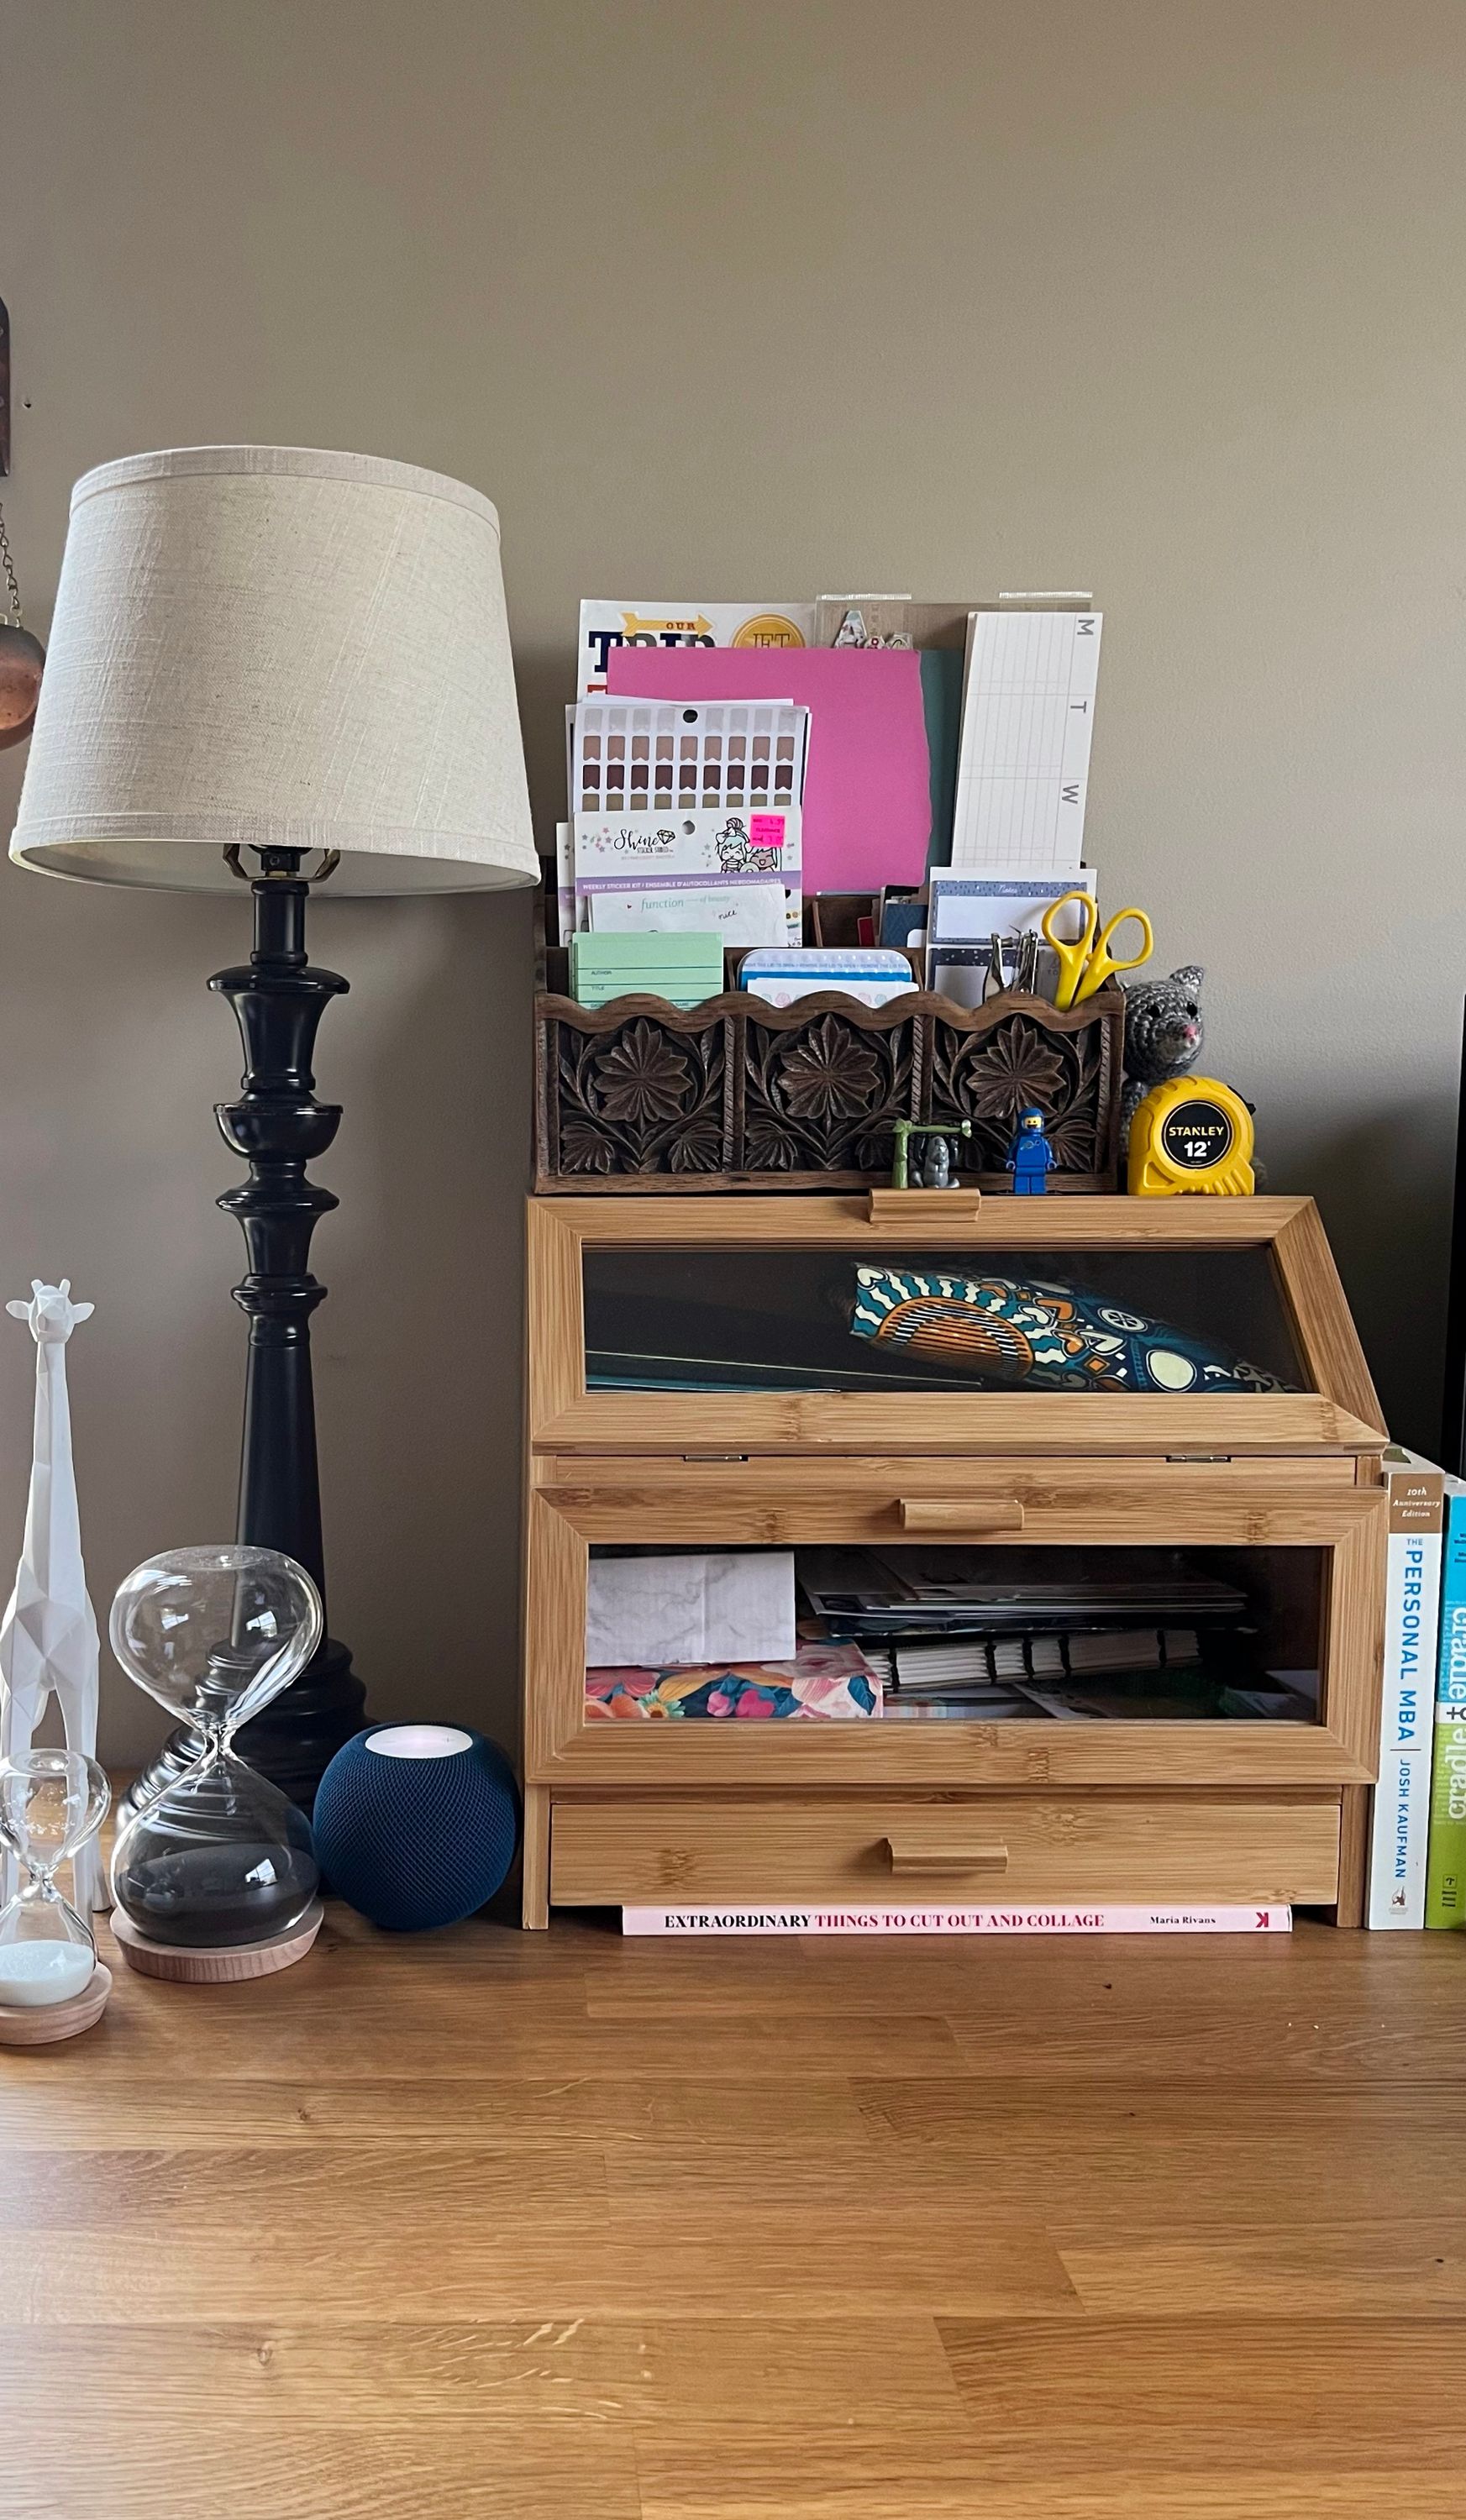 The stationary & junk journaling tower